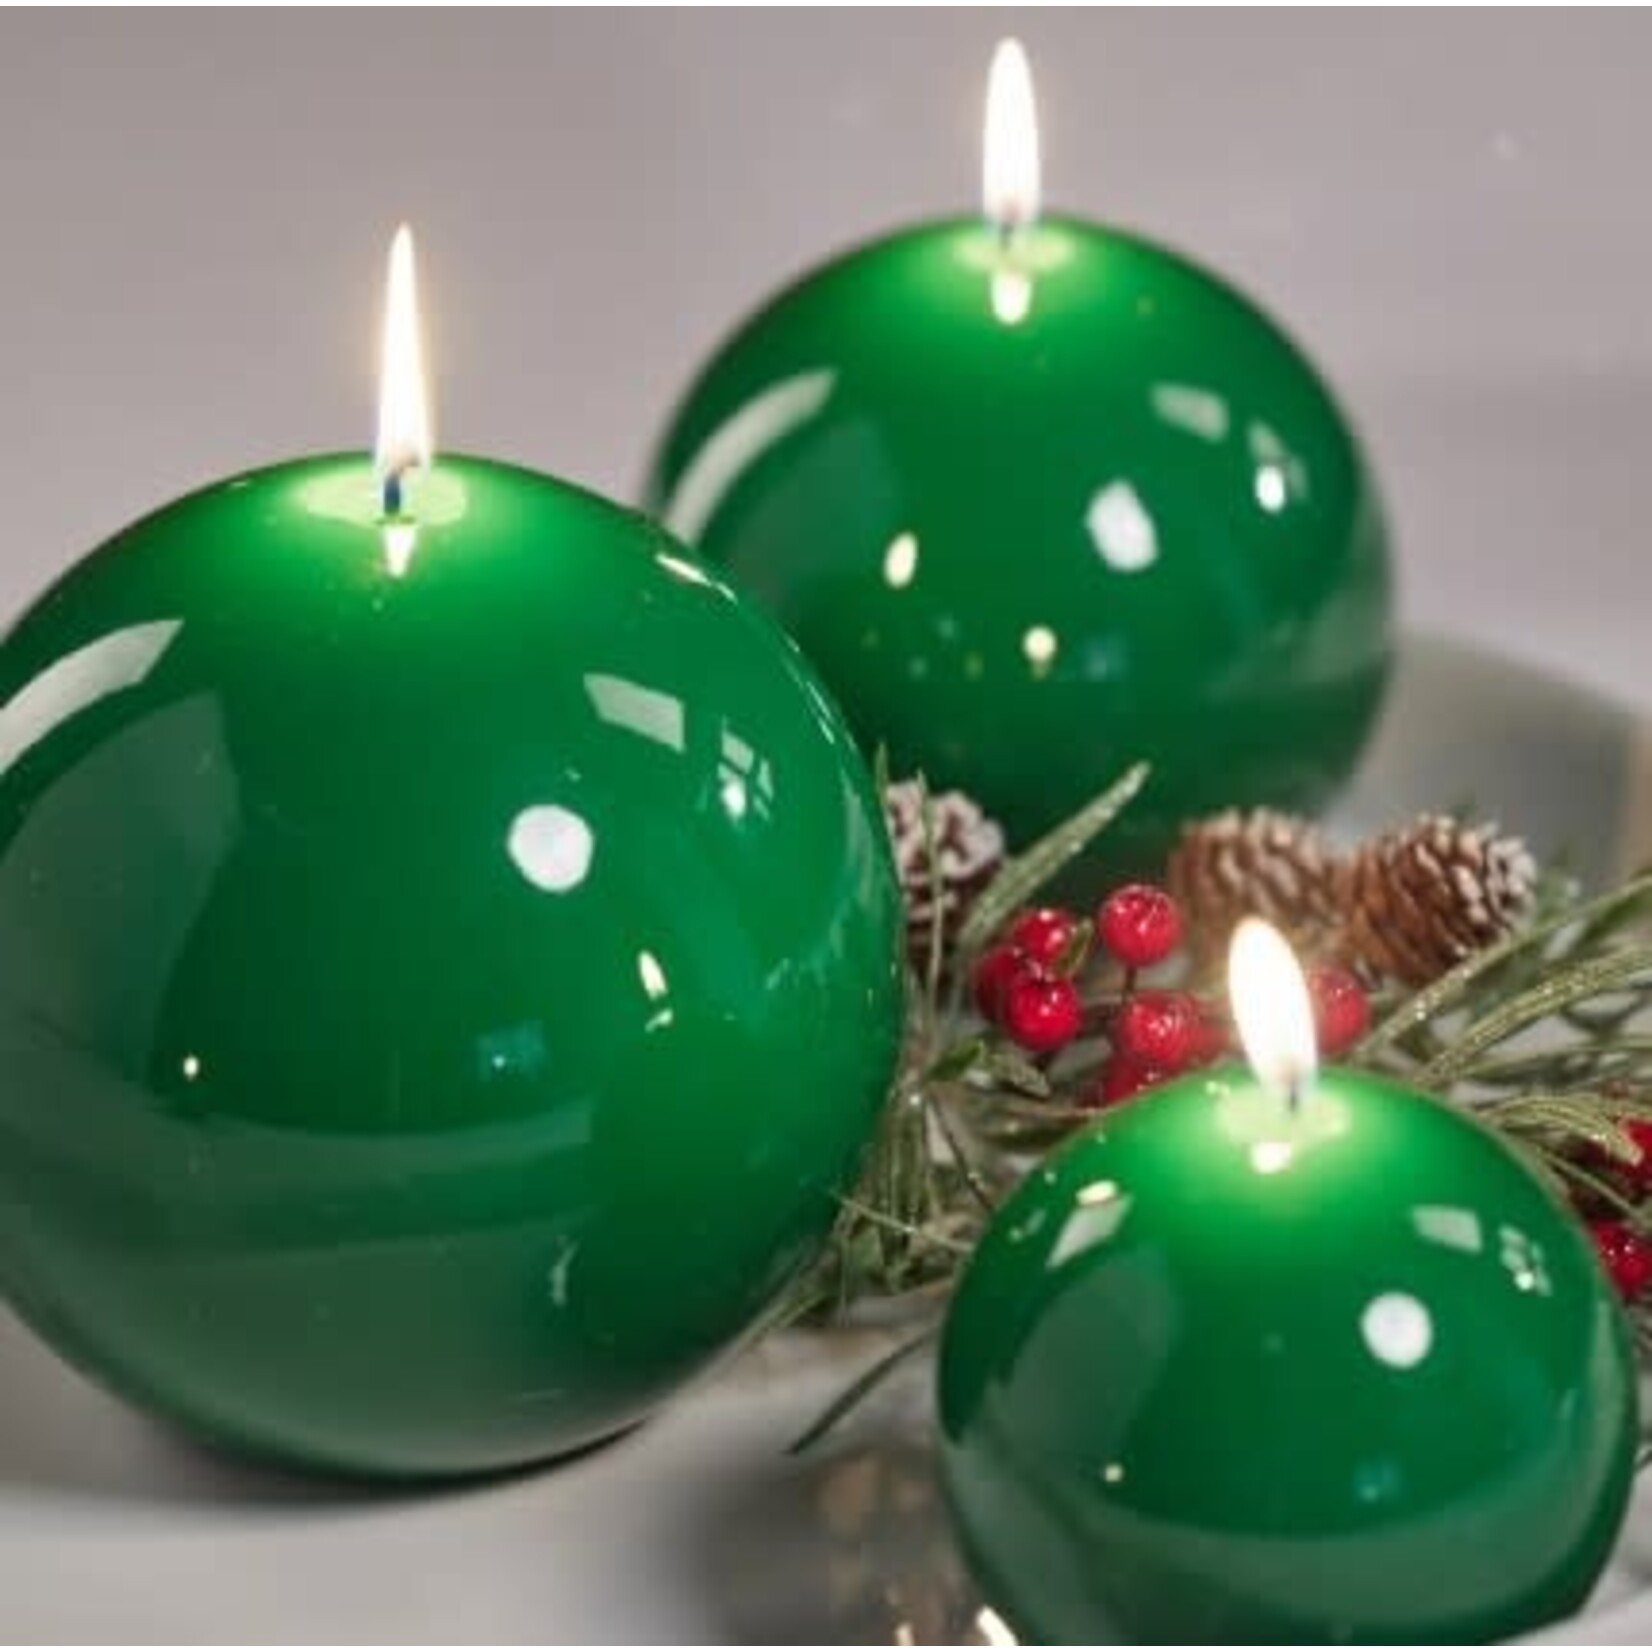 Zodax Lacquer Ball Candle